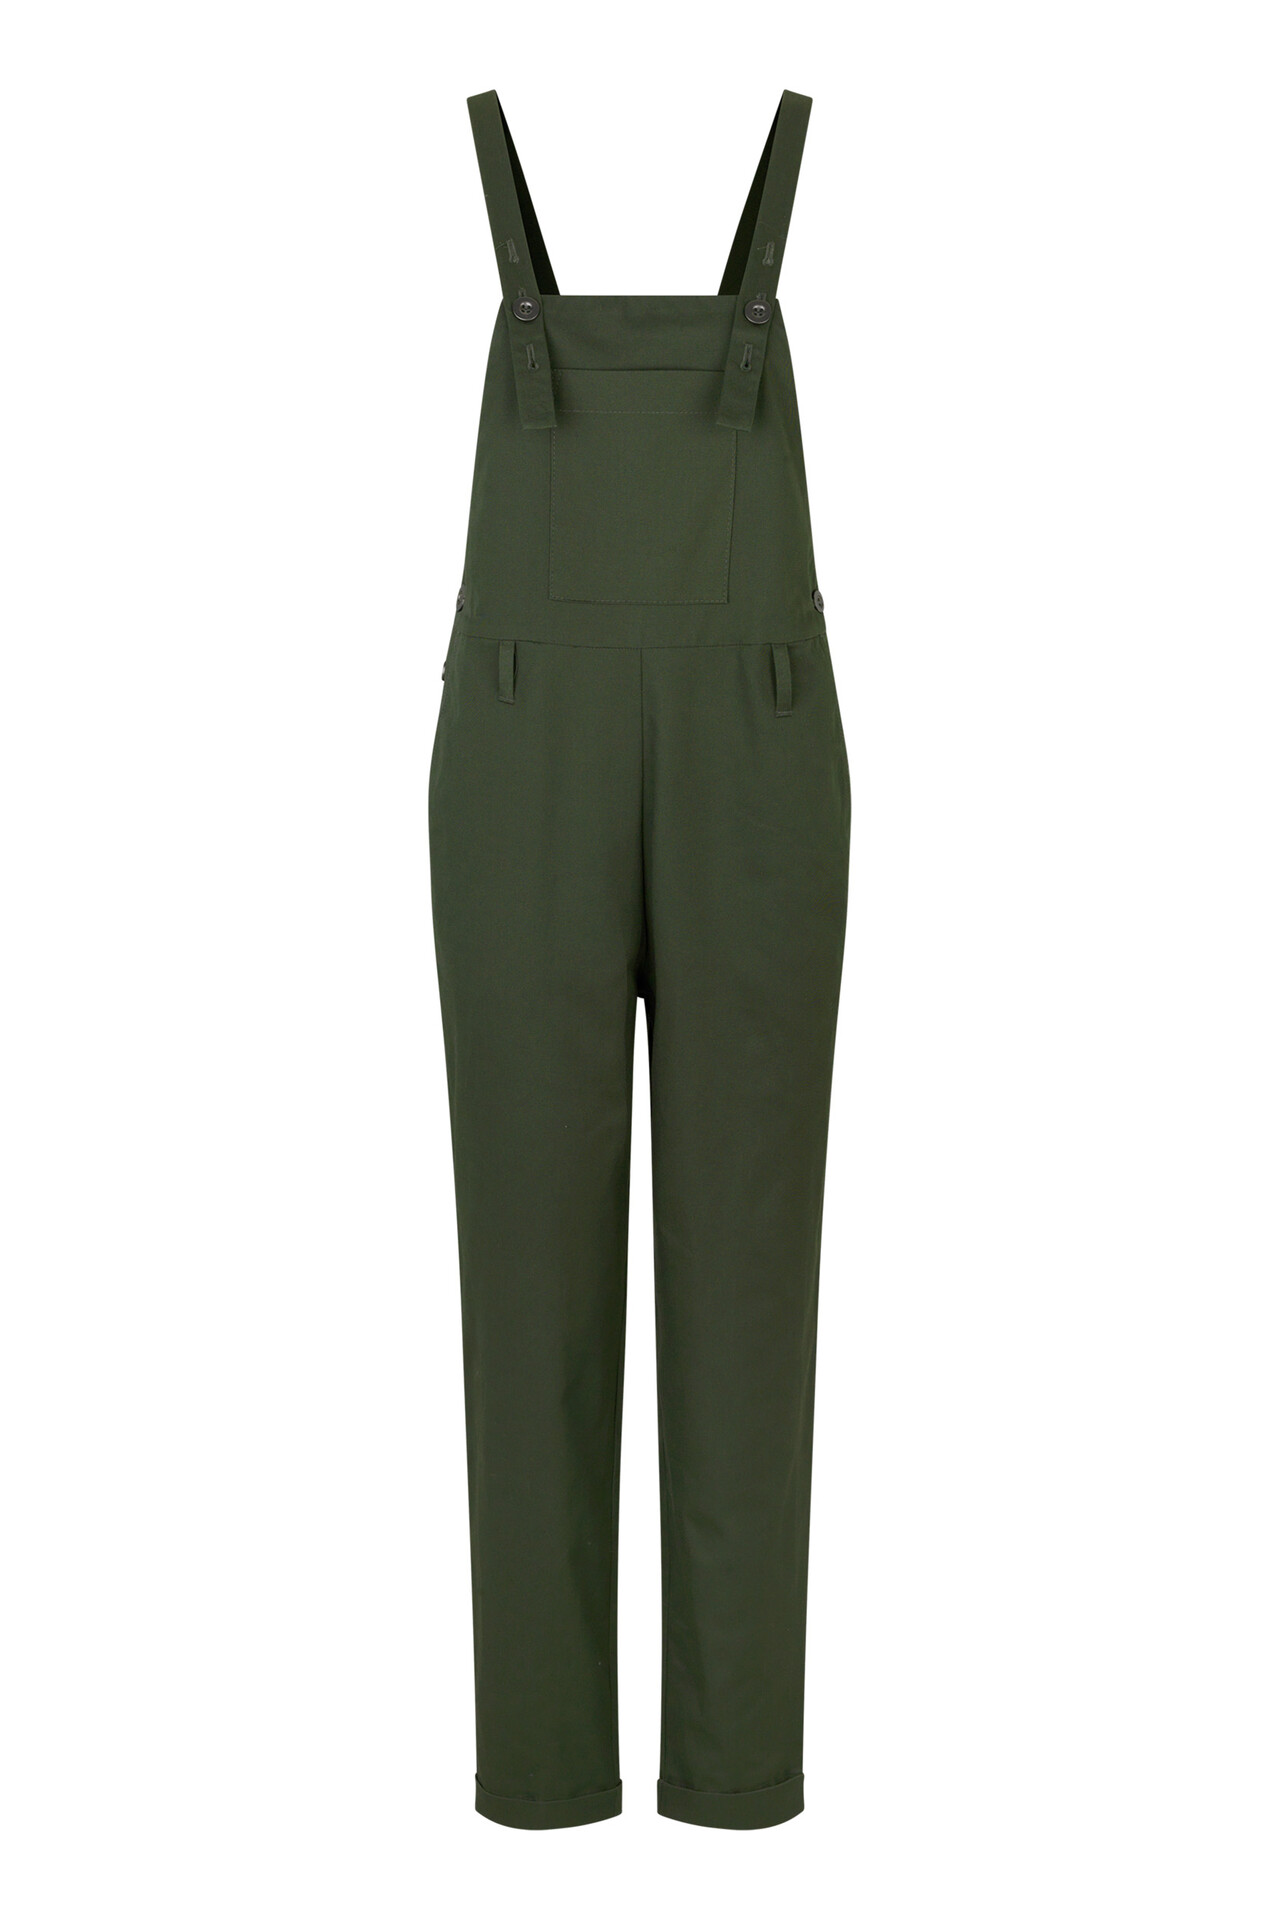 CRÉTON Worker overalls (ARMY GRØN 38)